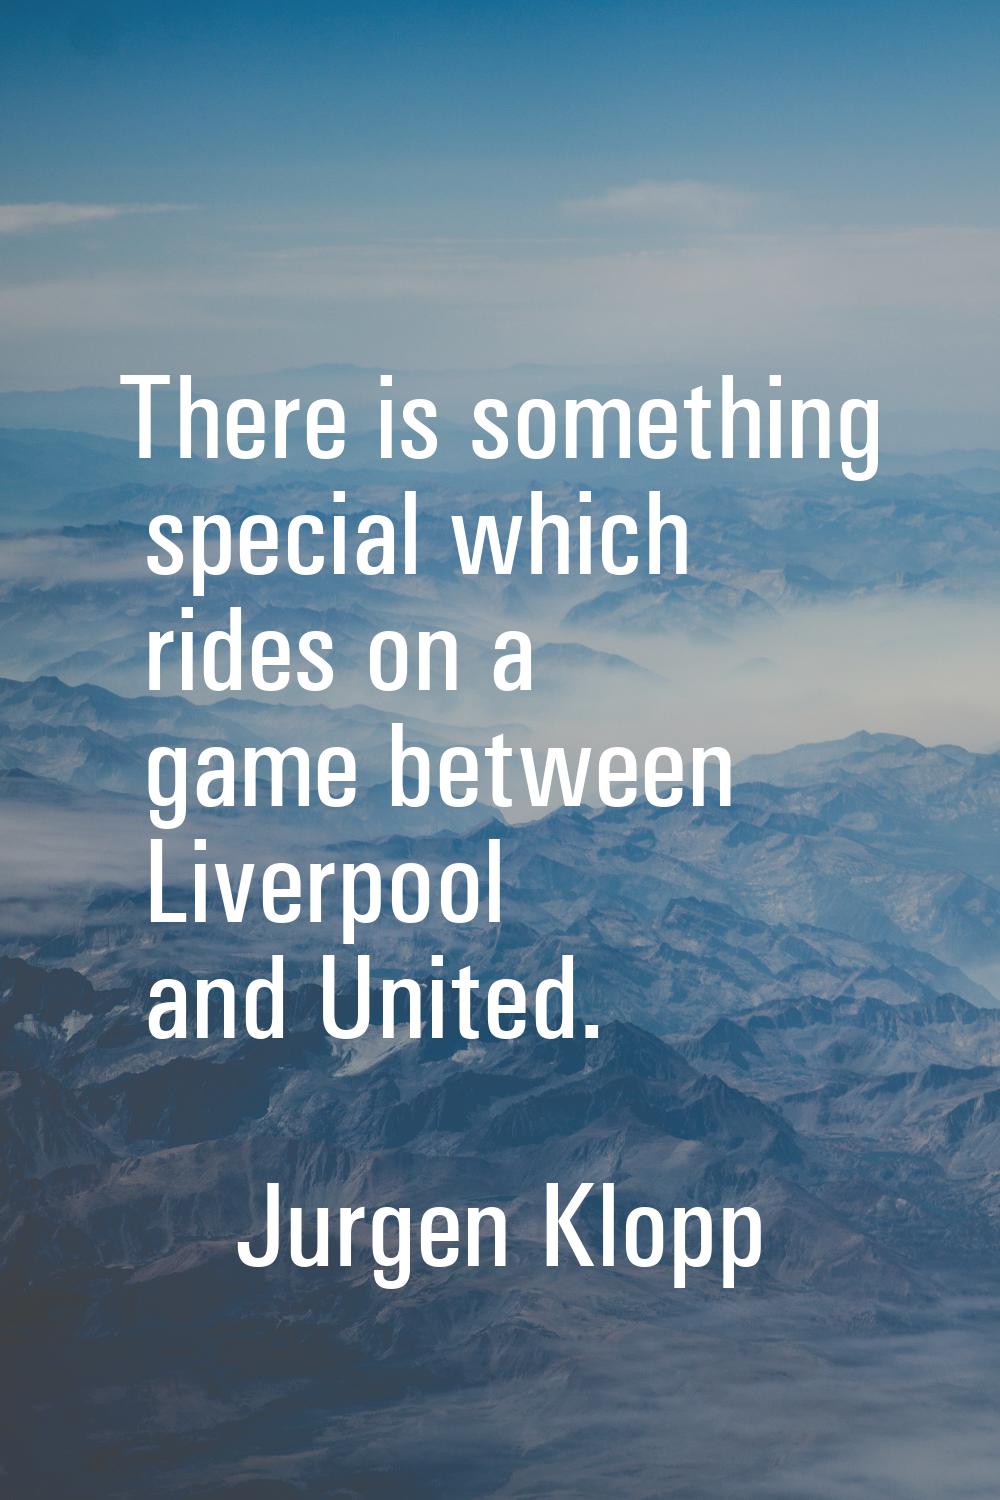 There is something special which rides on a game between Liverpool and United.